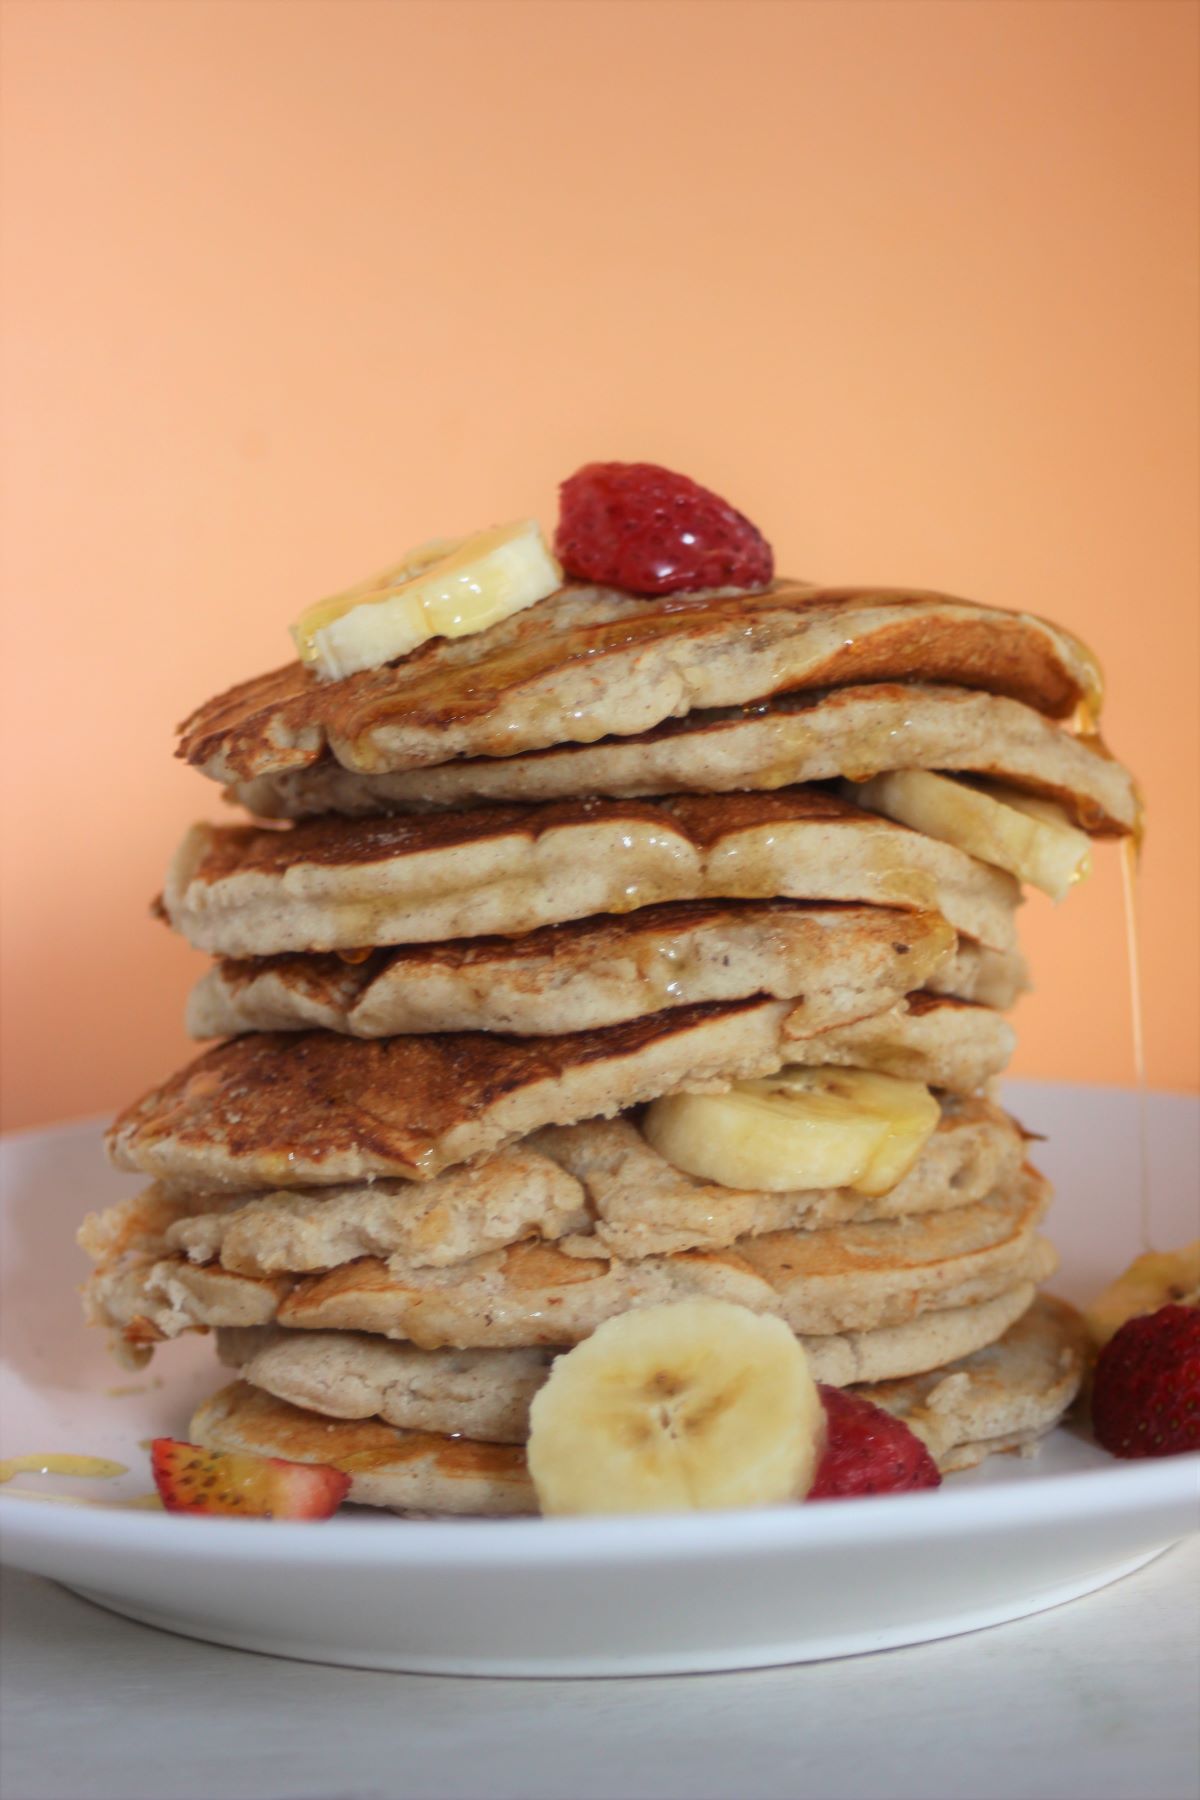 Tower of banana pancakes with banana slices and strawberries on a white plate.